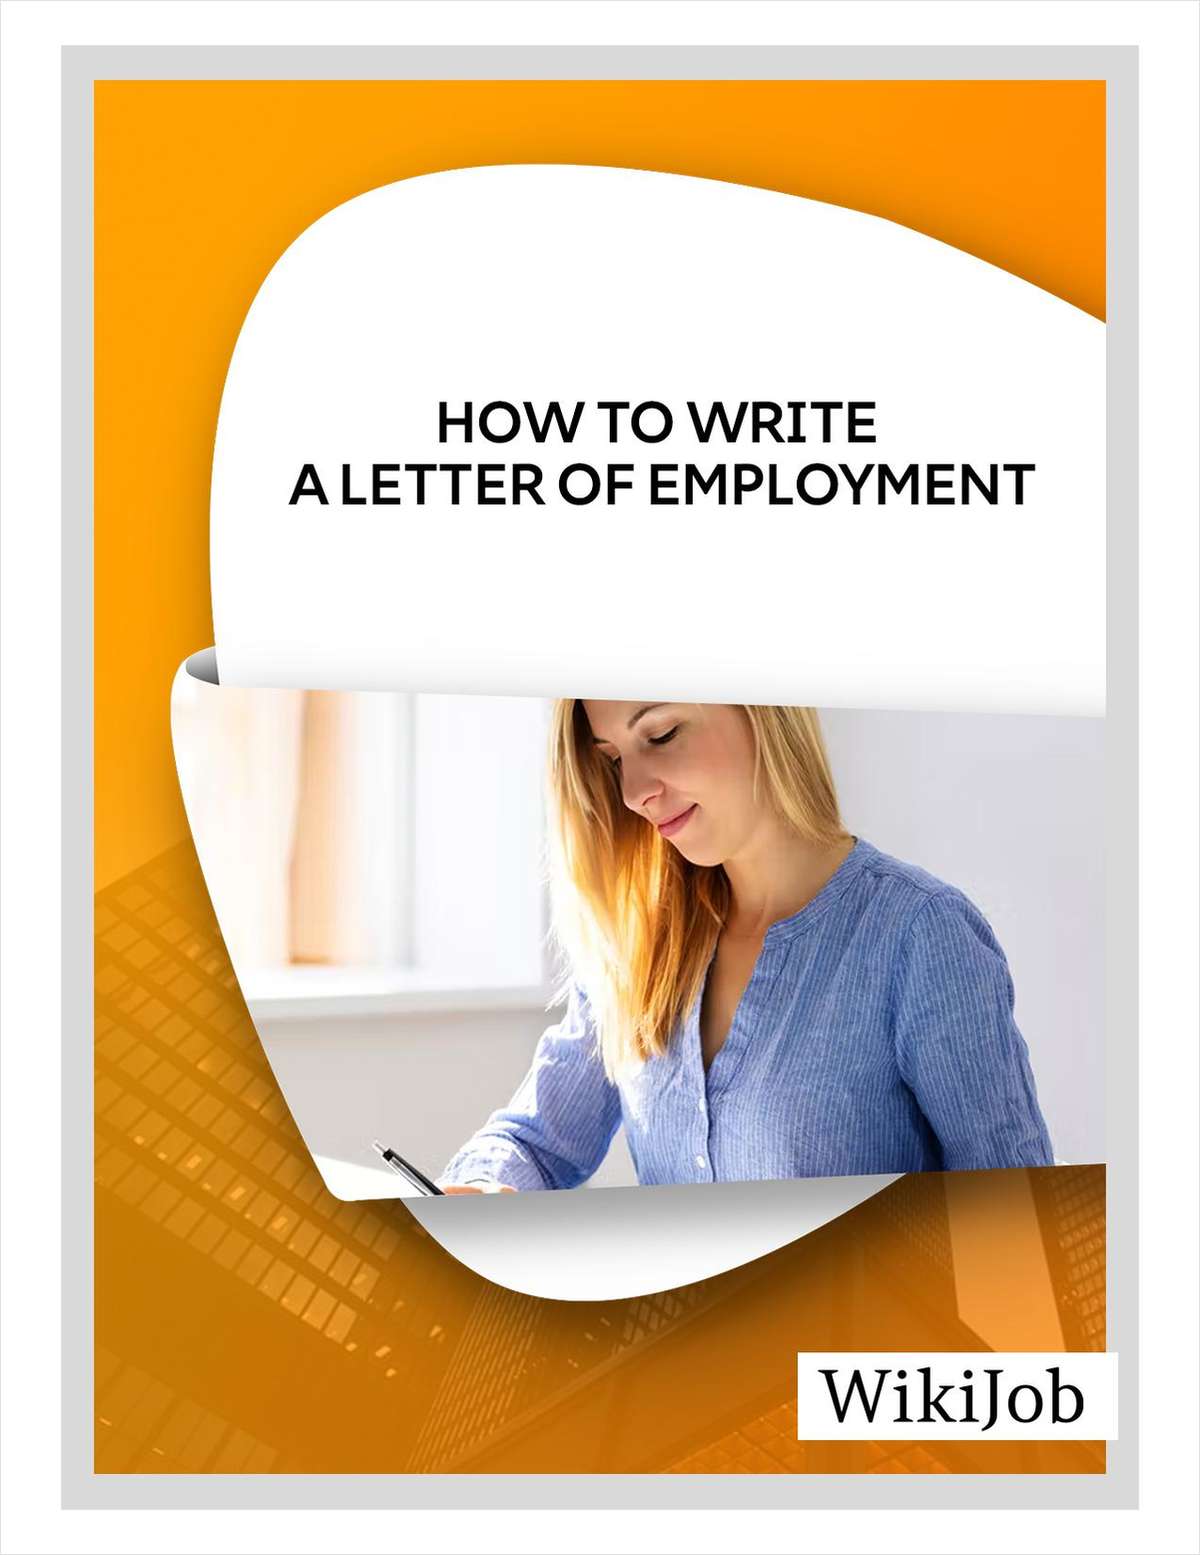 How to Write a Letter of Employment